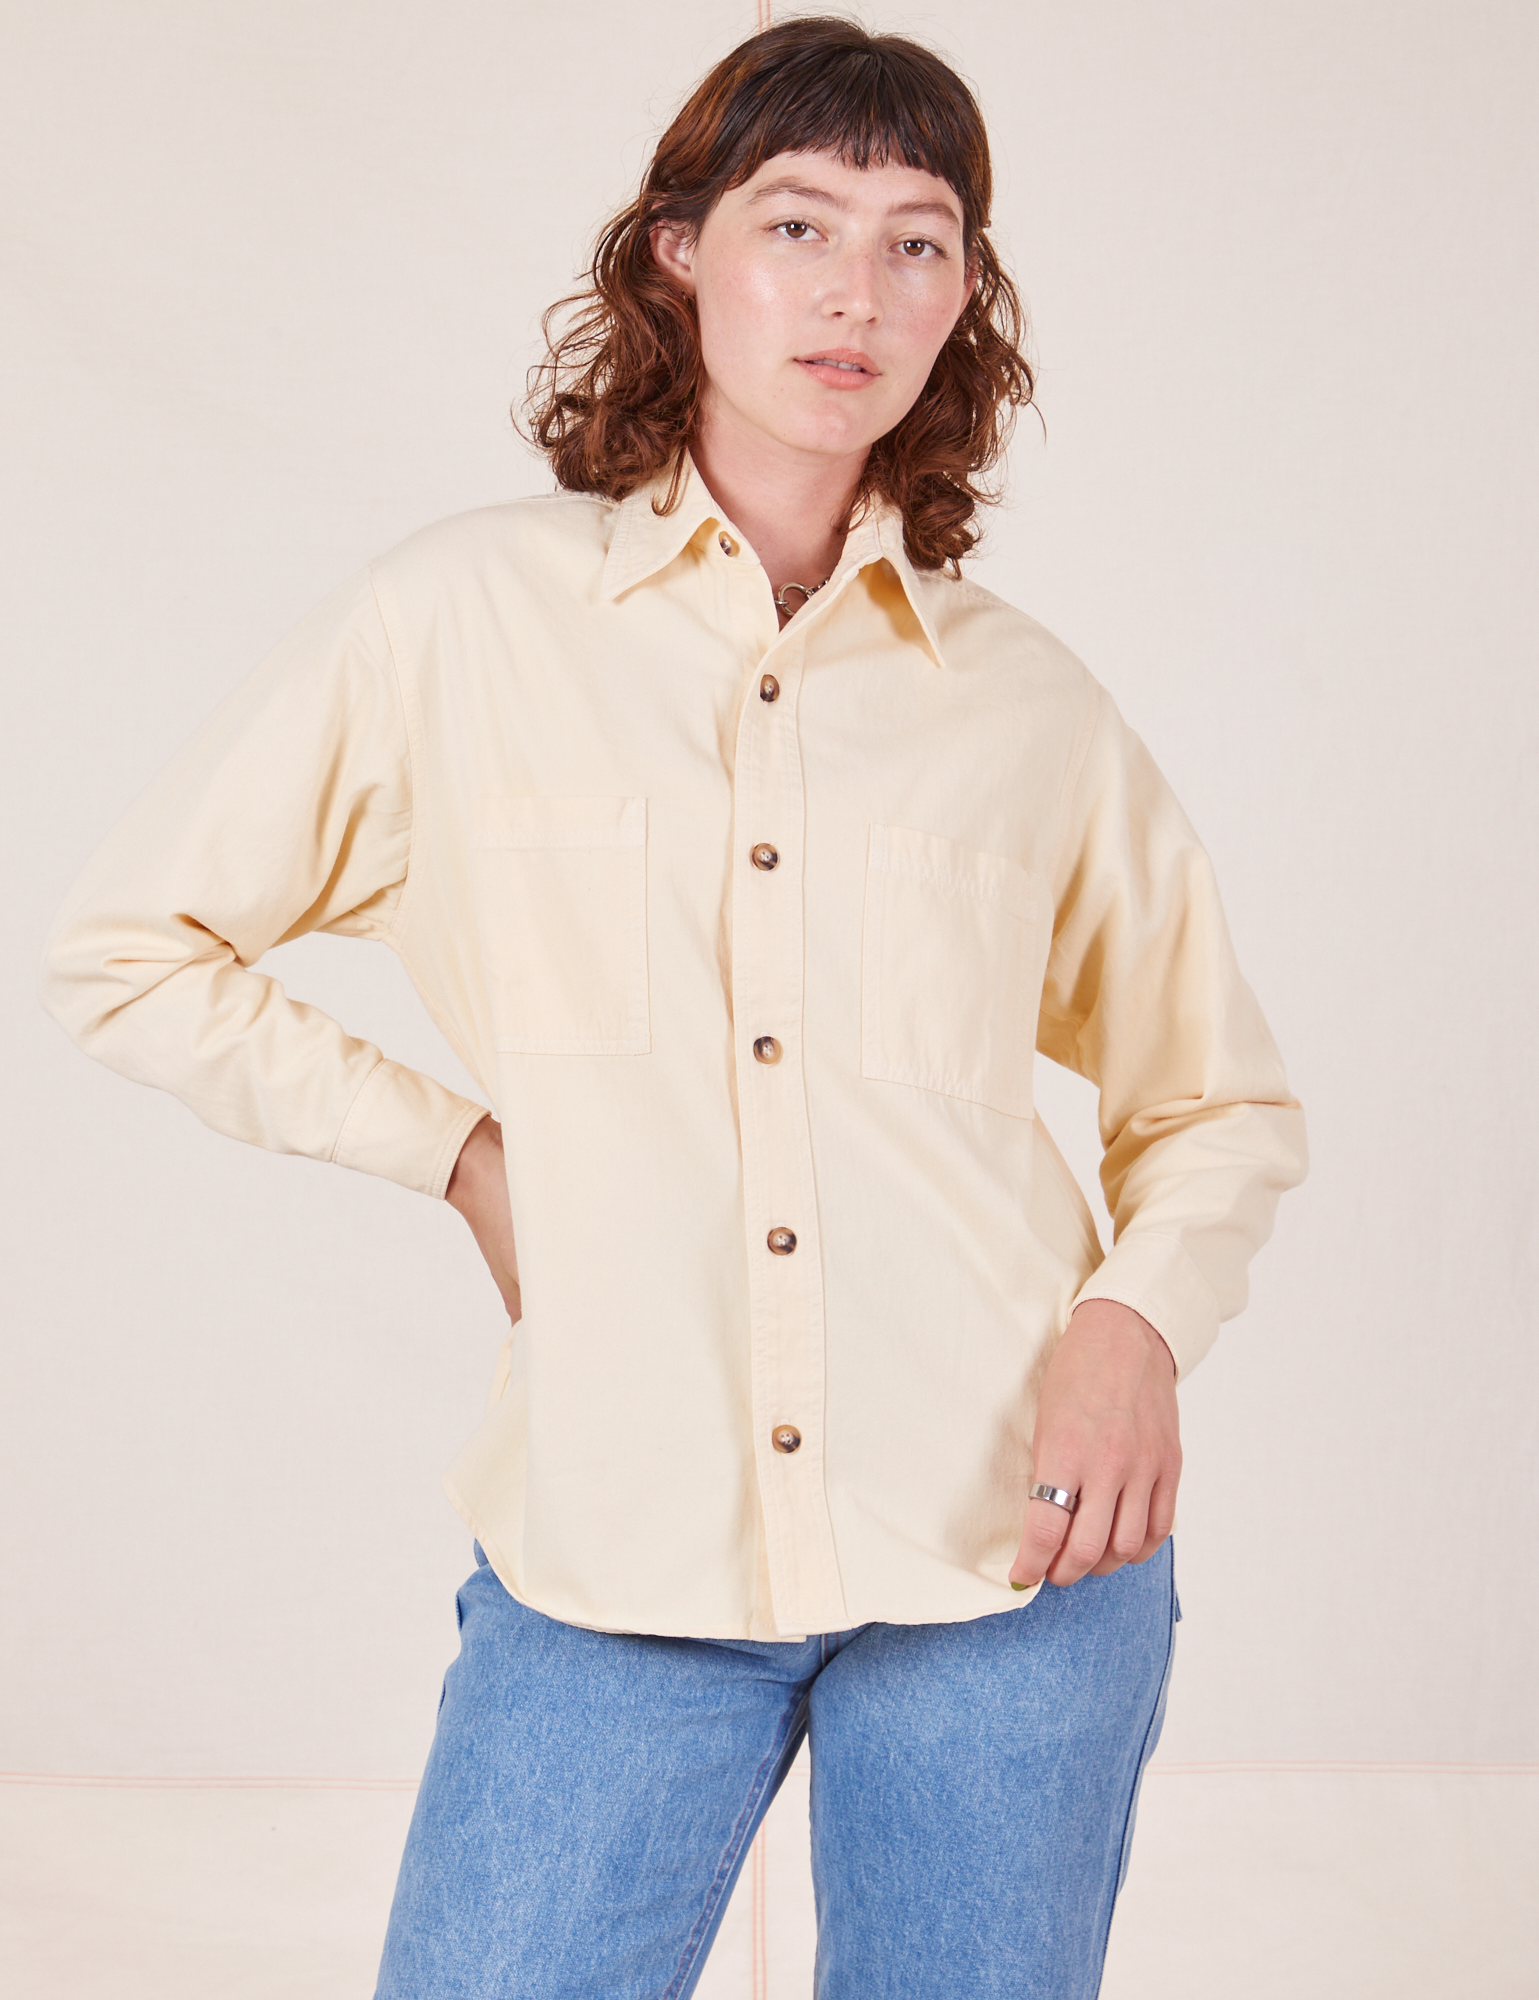 Alex is wearing a buttoned up Oversize Overshirt in Vintage Tee Off-White 